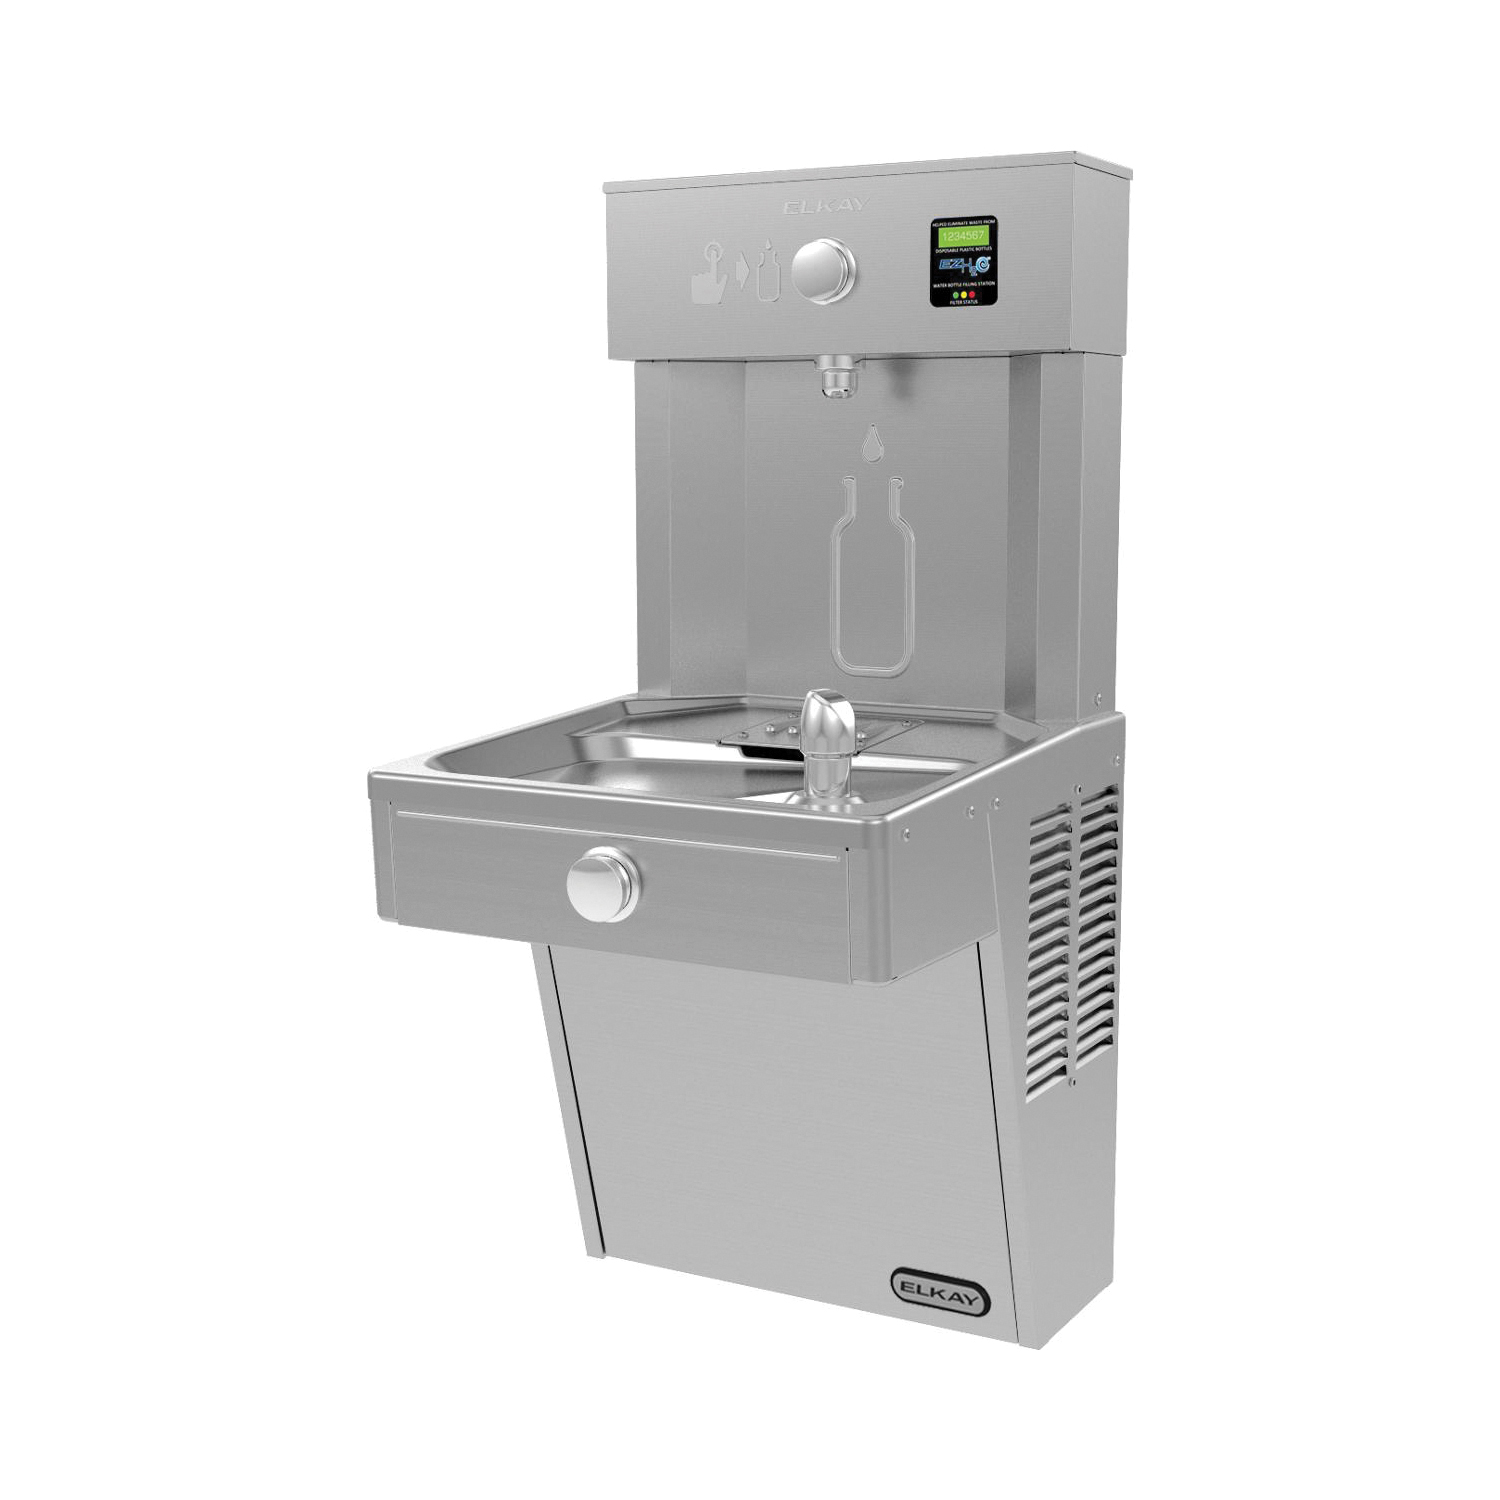 Elkay® LVRC8WSK Filtered Bottle Filling Station and Cooler, 1.1 gpm Flow Rate, Push Button Operation, Refrigerated Chilling, Domestic